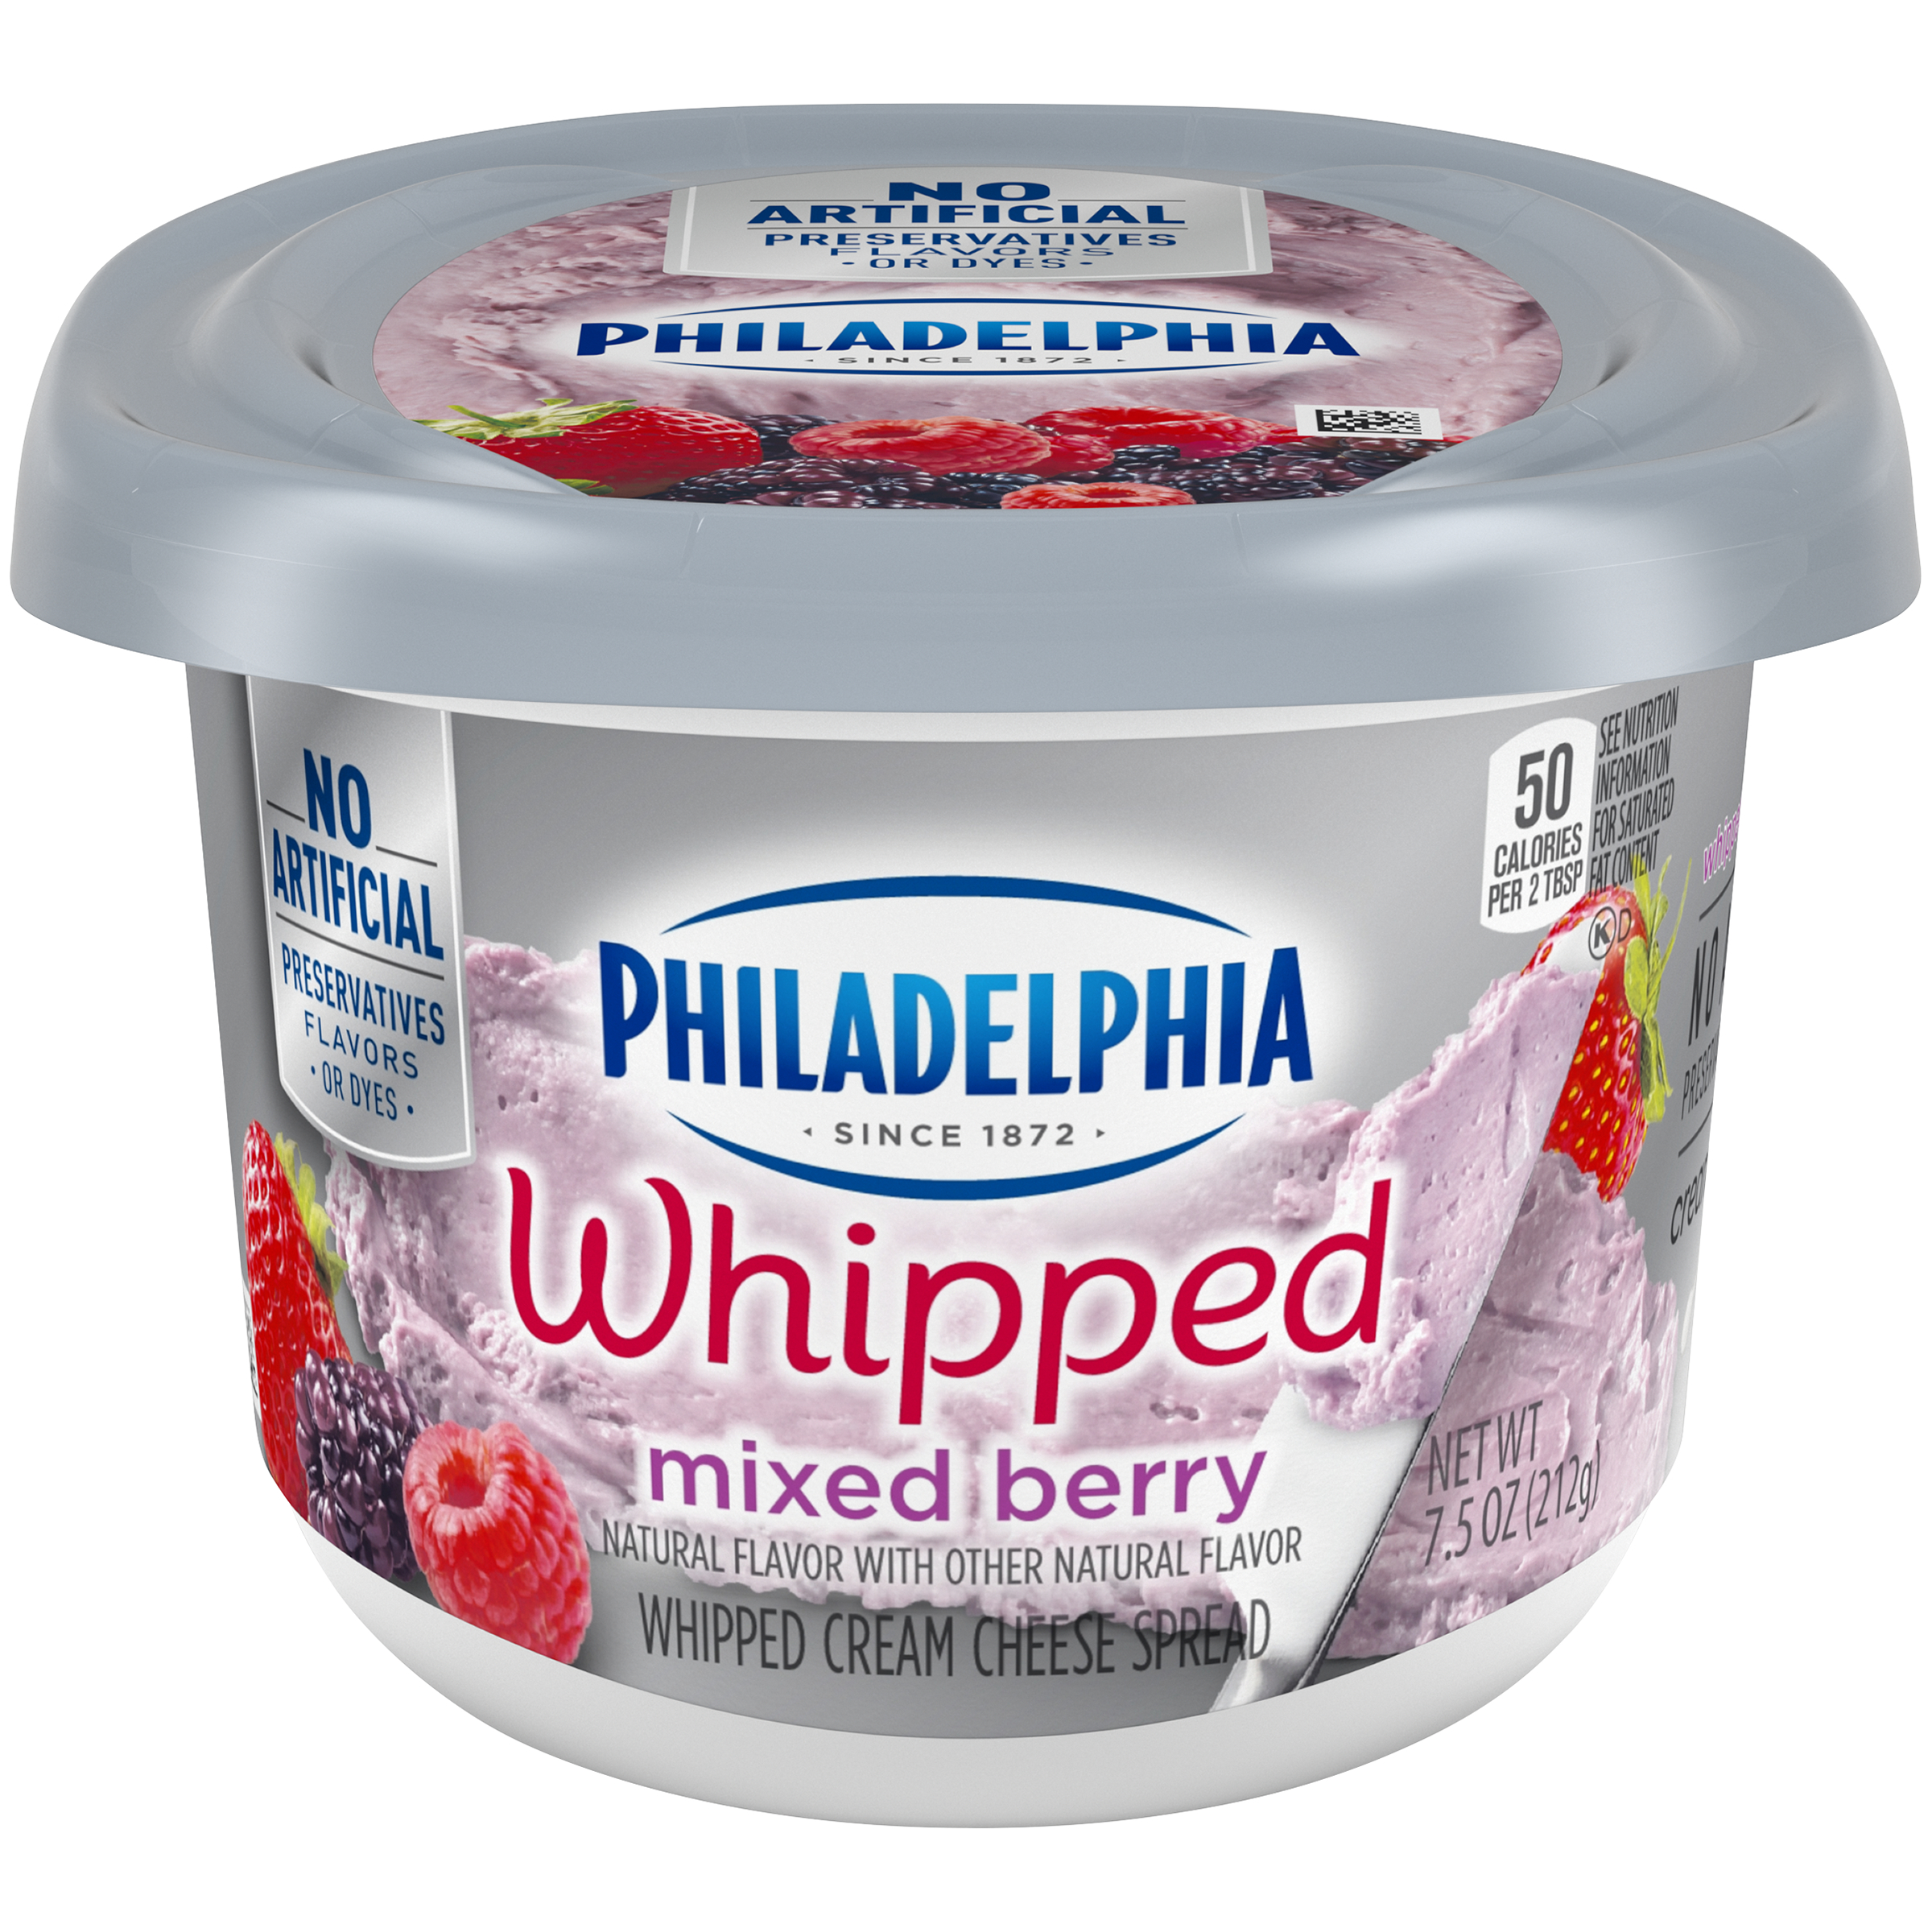 Philadelphia Whipped Mixed Berry Cream Cheese 7.5 oz Tub - My Food and Family